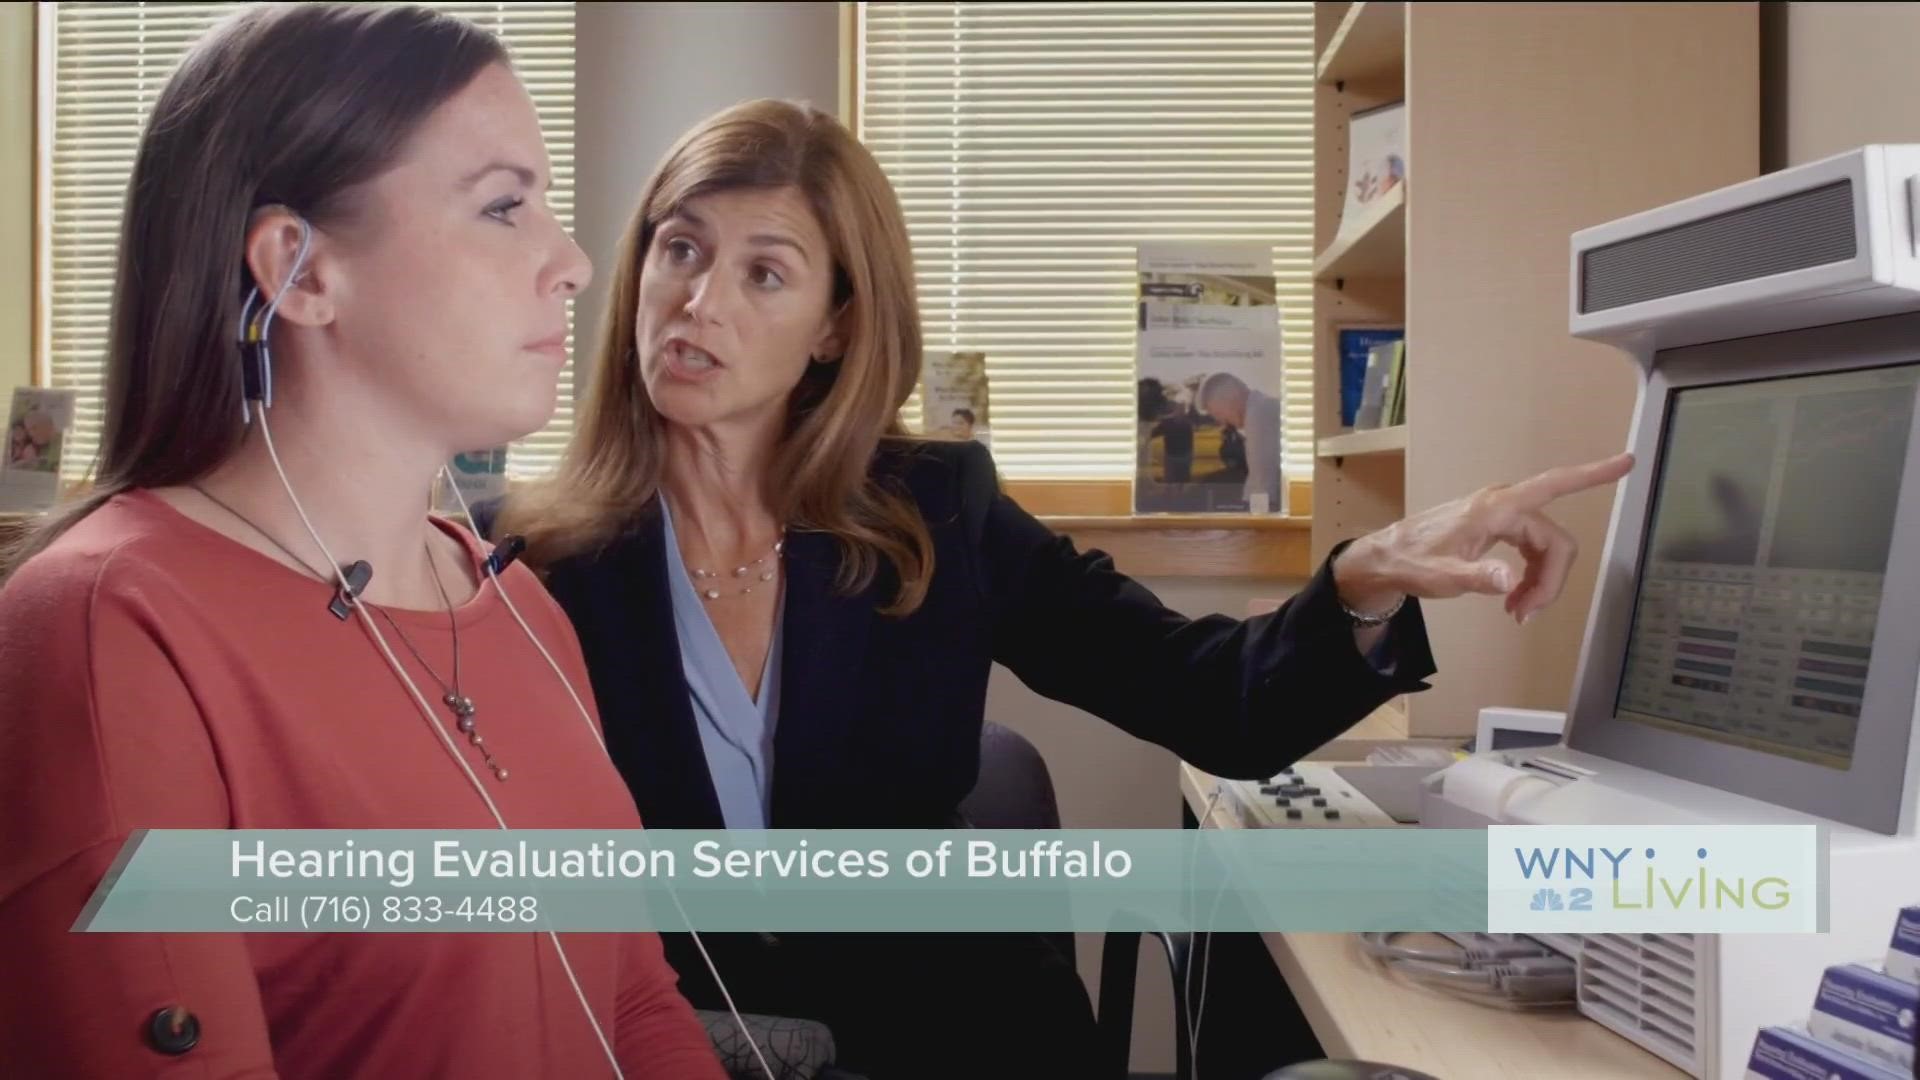 WNY Living -February 25th - Hearing Evaluation Services of Buffalo-THIS VIDEO IS SPONSORED BY HEARING EVALUATION SERVICES OF BUFFALO